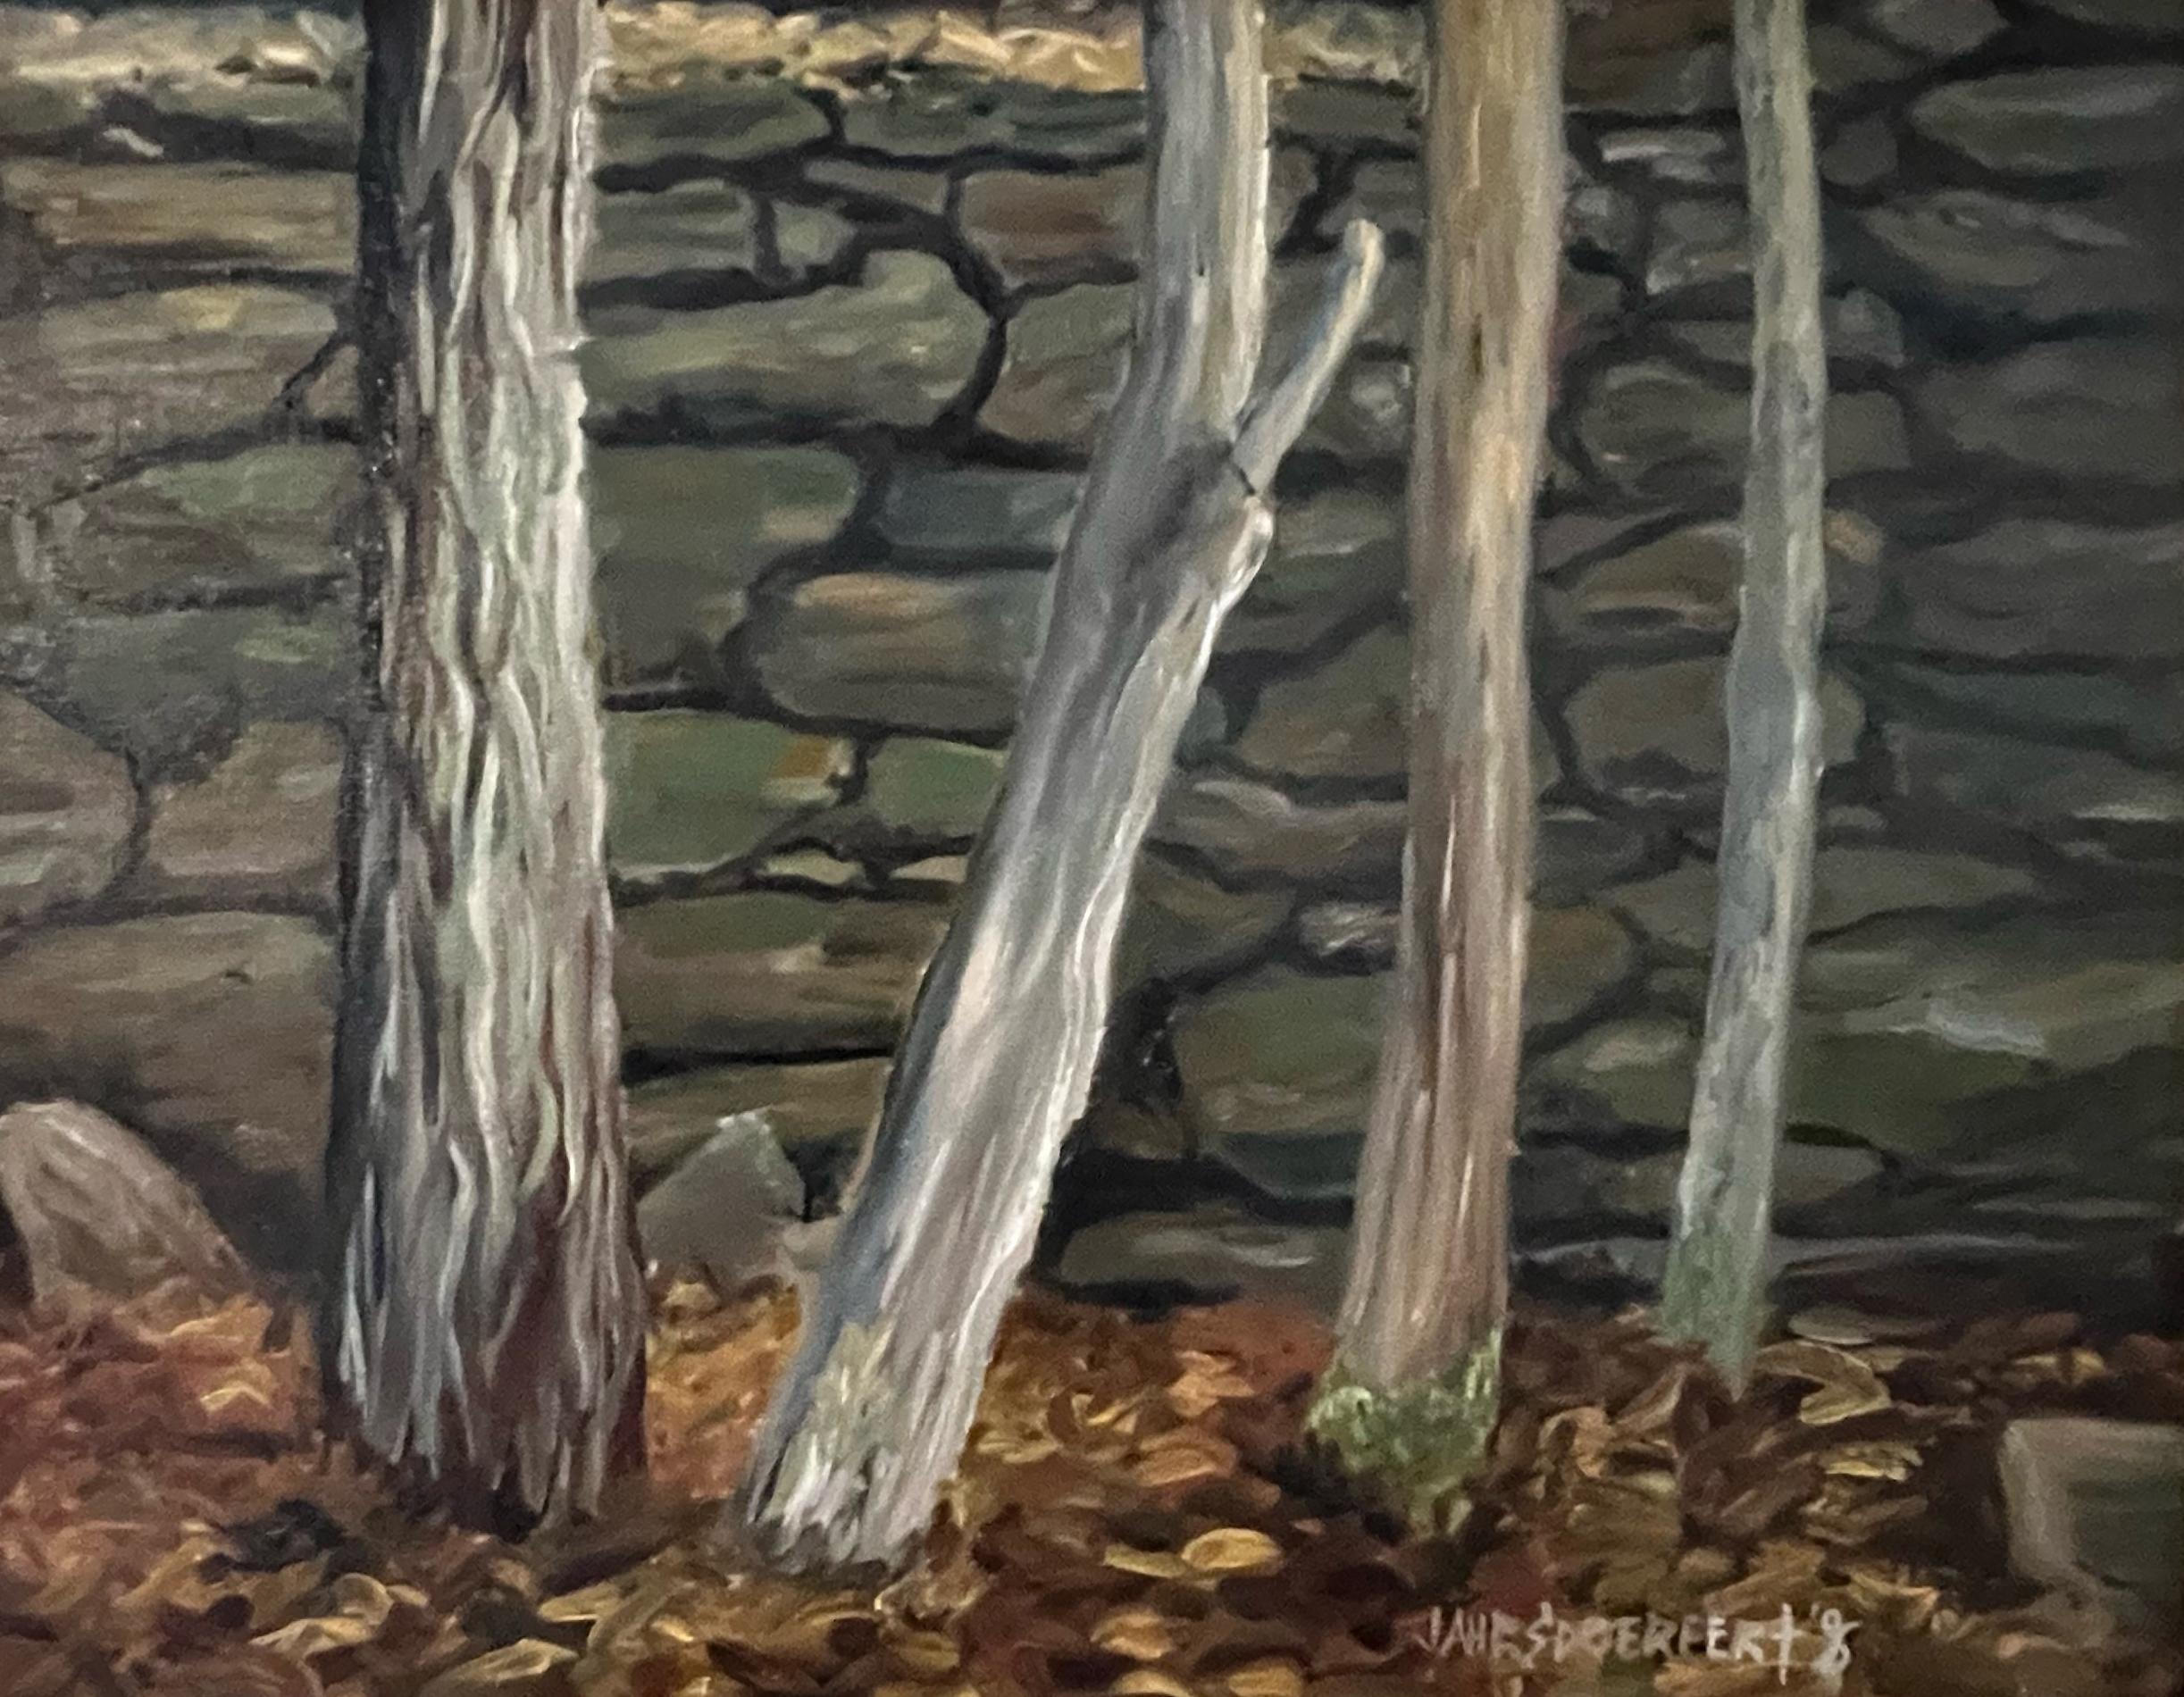 This piece, "Vermont Wall" is a 12x16 oil painting on canvas by artist James Jahrsdoerfer featuring an up-close view of an old hand-built rock wall that once discerned property lines between farm lands. Trees line this once empty field, as the sun